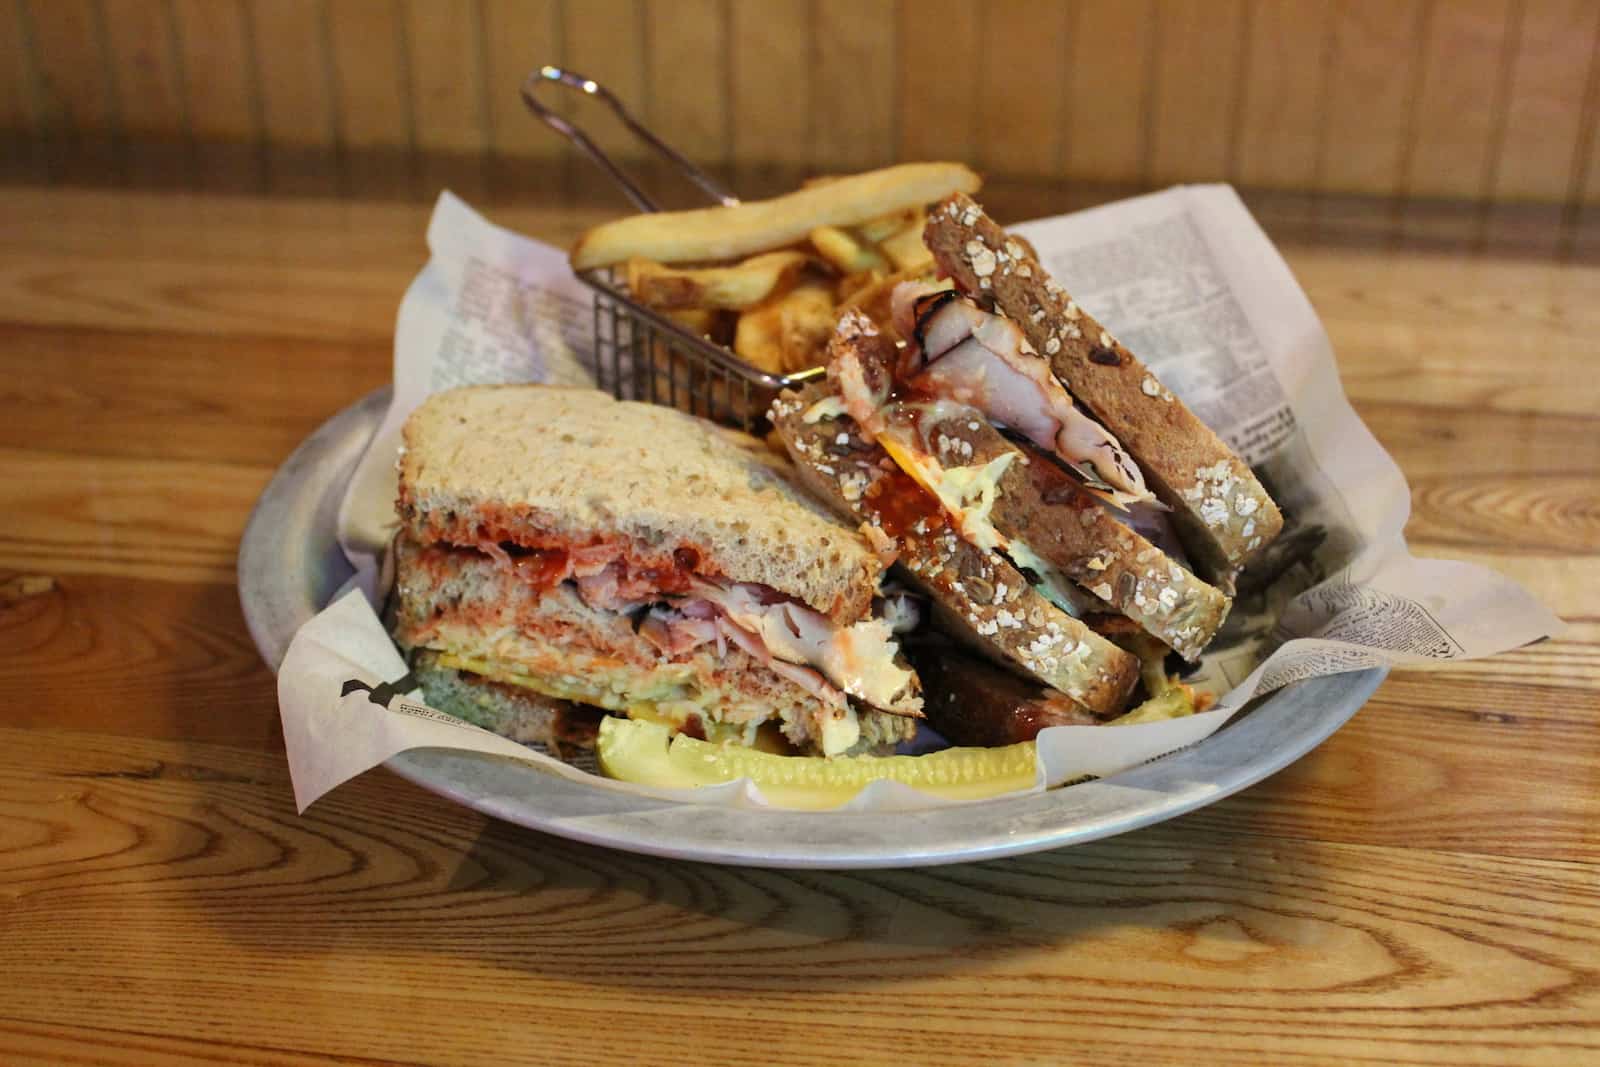 Photo of East Village Grille Signature Sandwiches